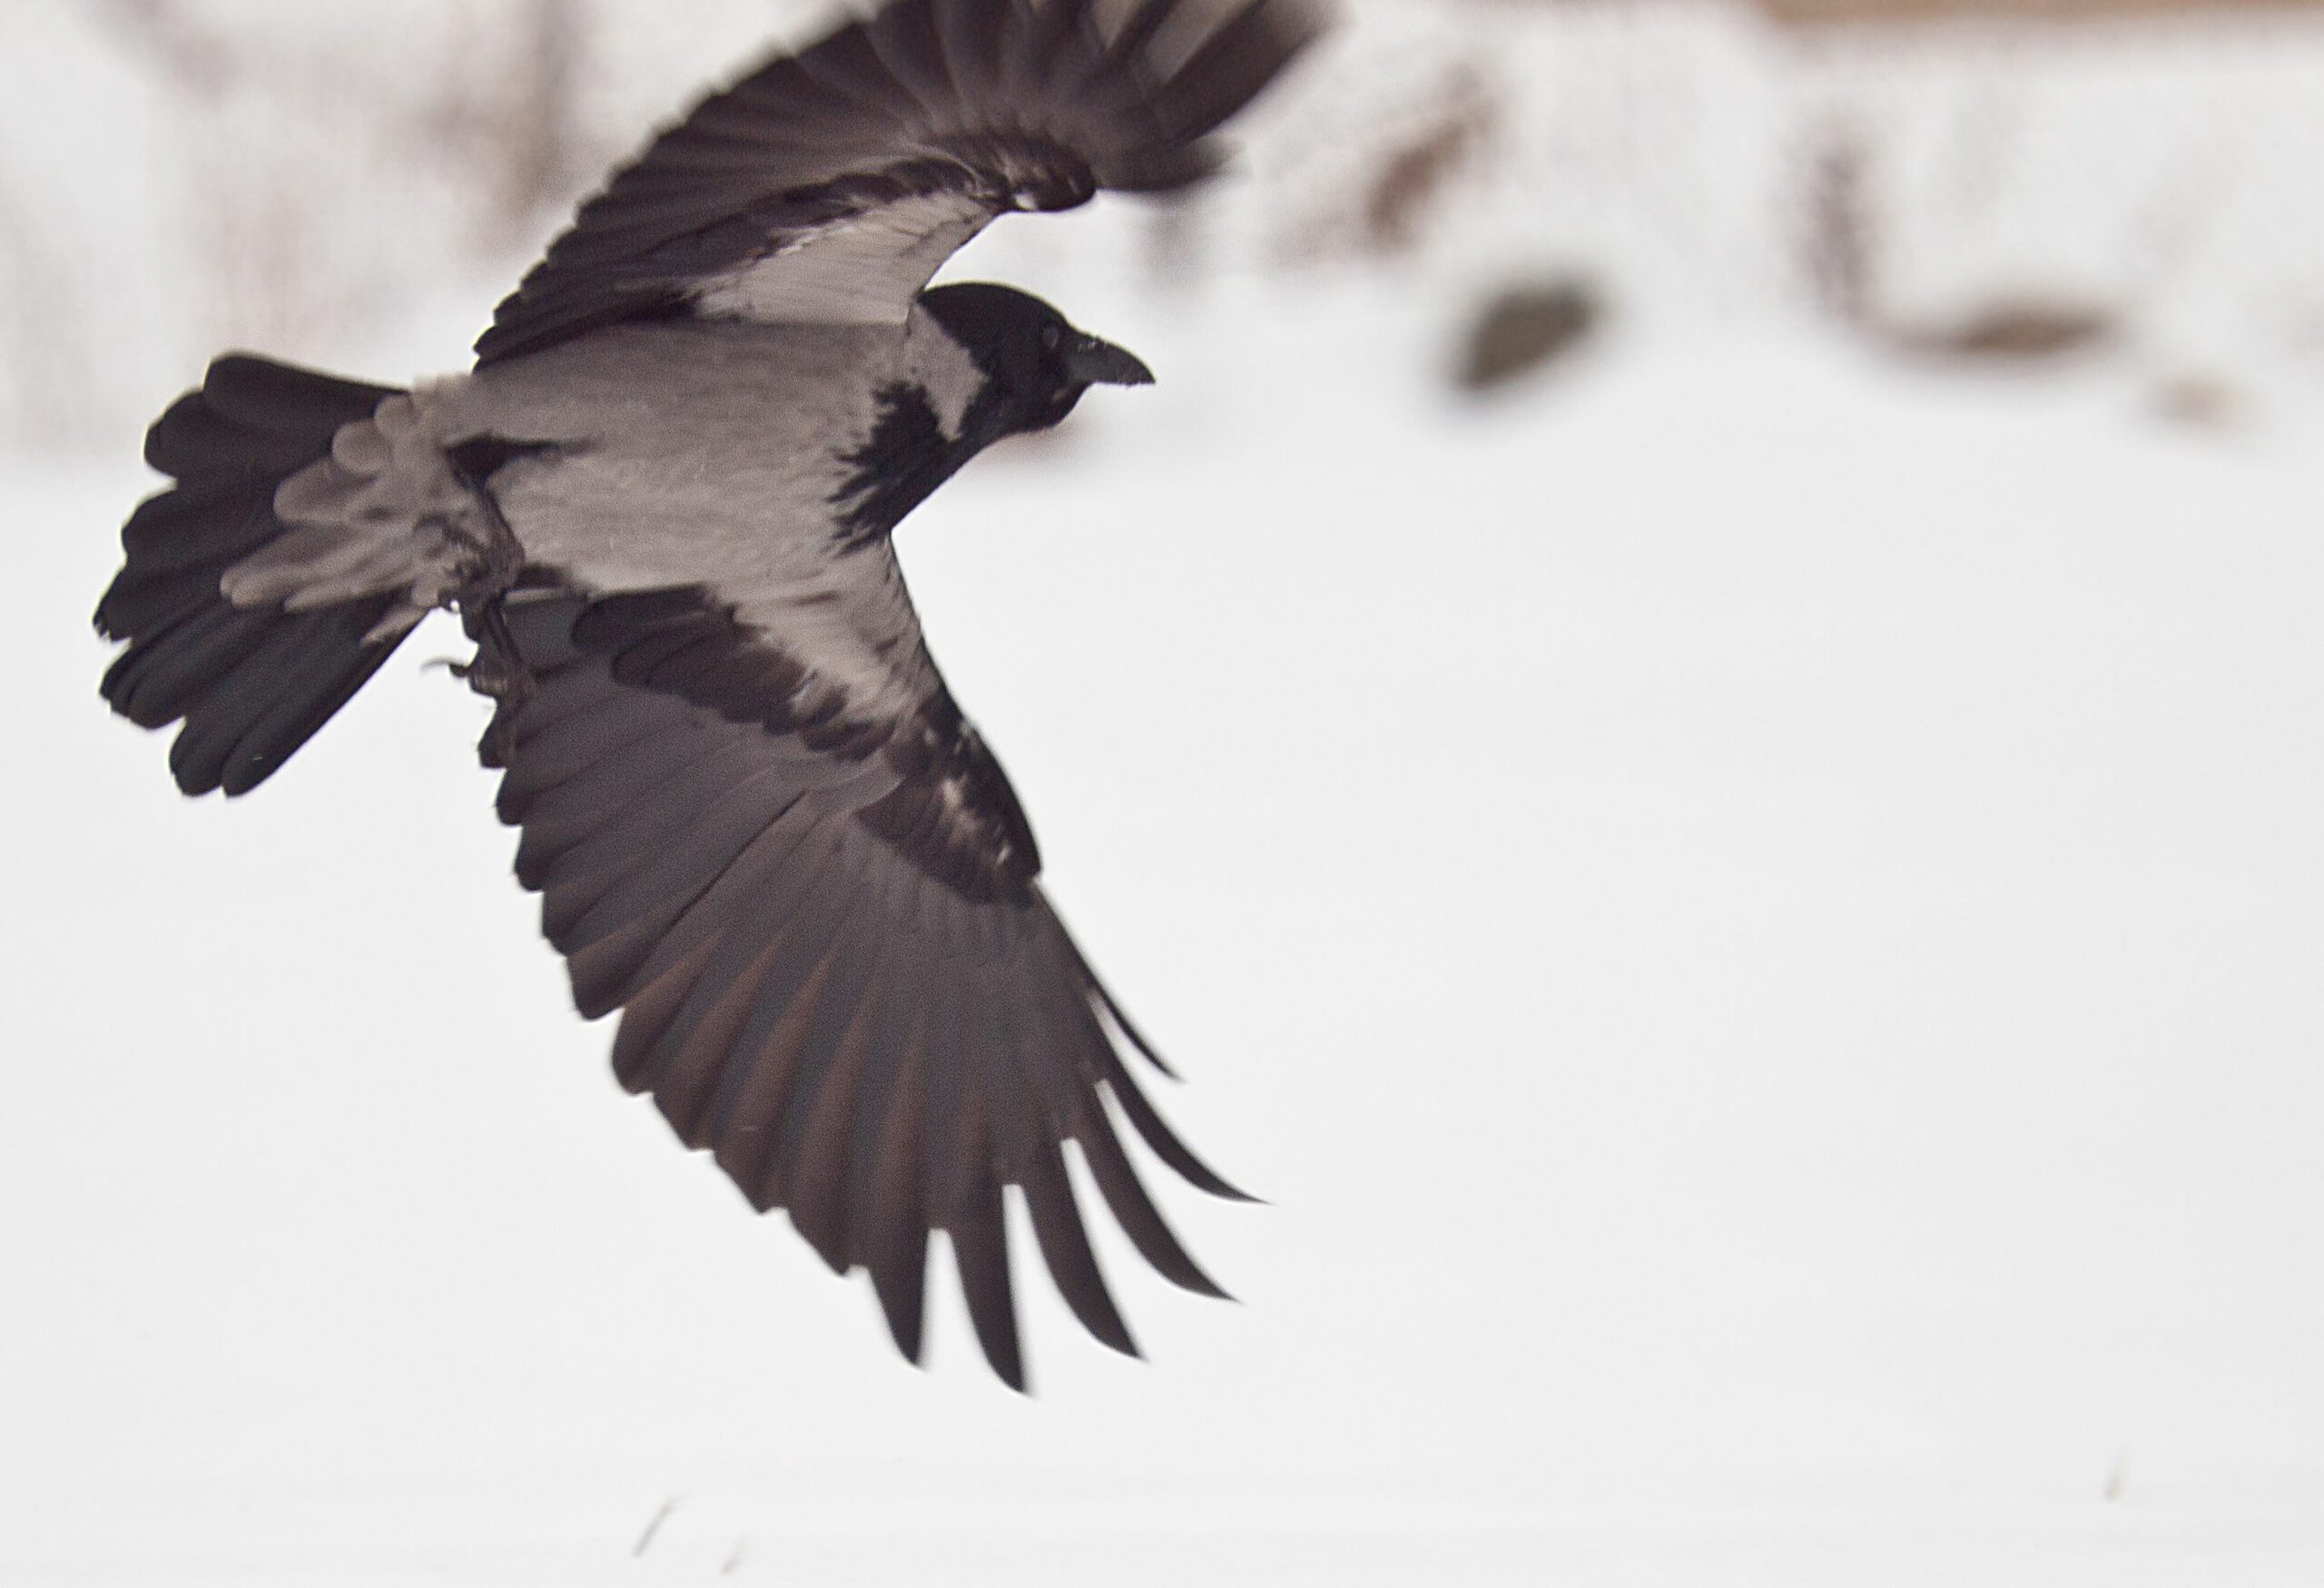 A hooded crow flies above snowy ground.